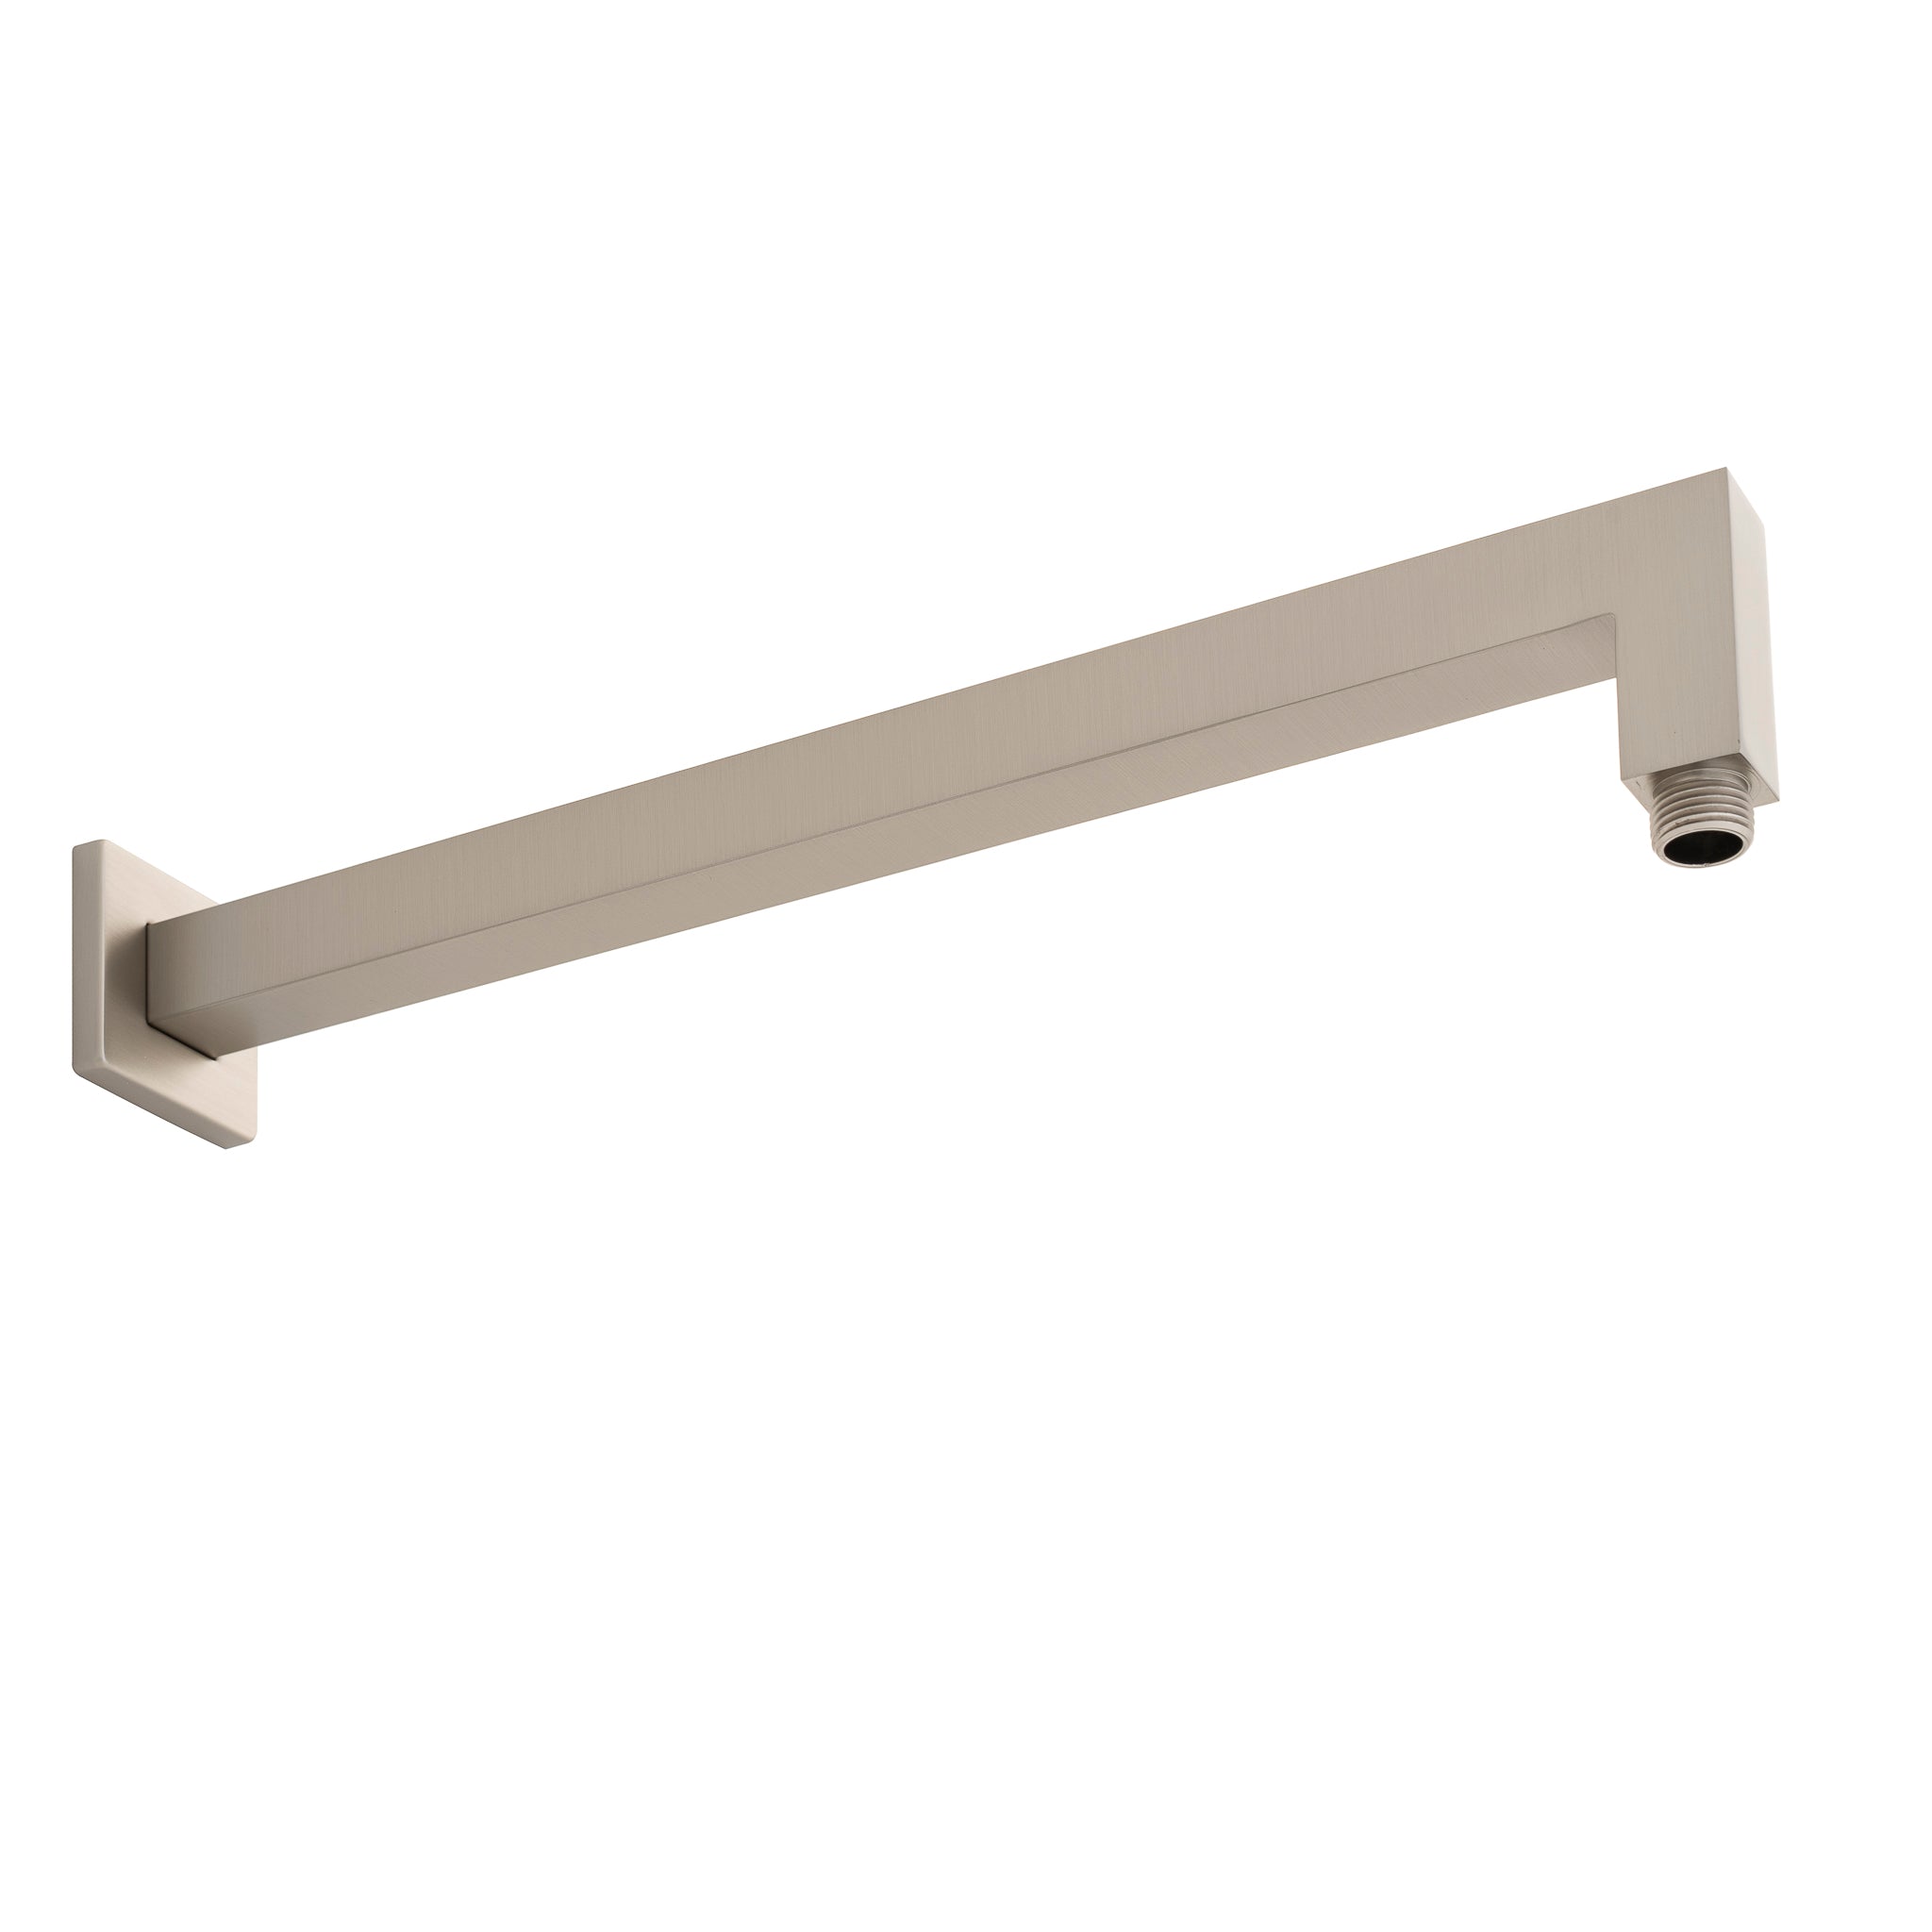 Square 400mm Shower Wall Arm, Brushed Nickel